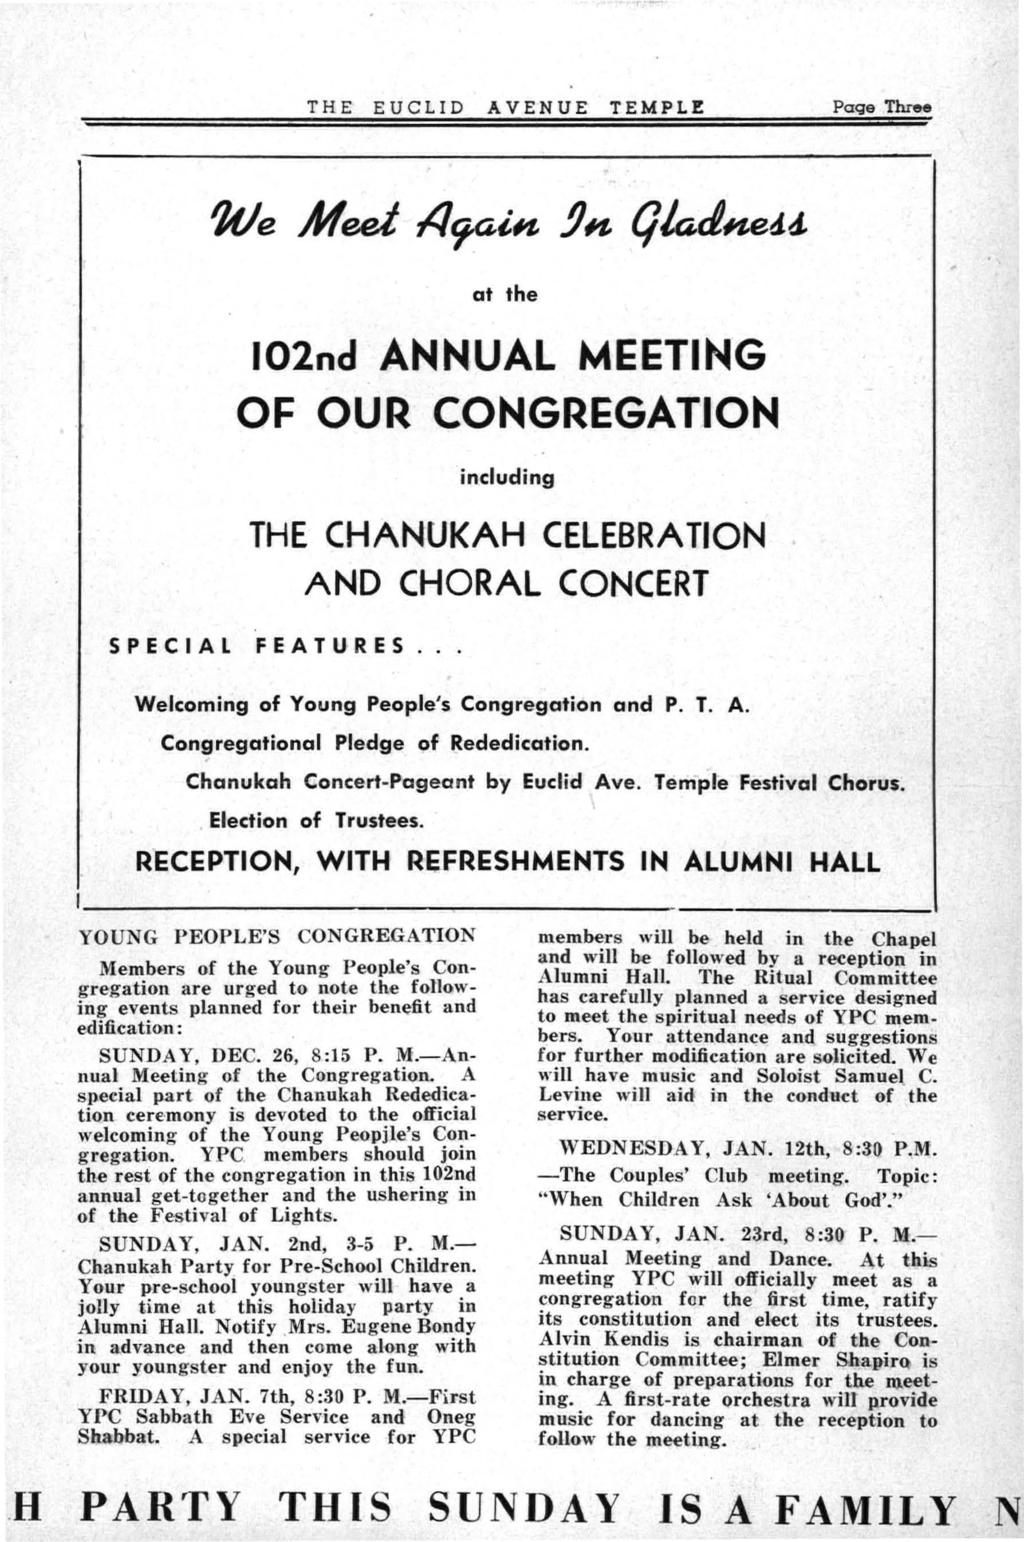 THE EUCLID AVENUE TEMPLE Page Three at the I02nd ANNUAL MEETING OF OUR CONGREGATION including THE CHANUKAH CELEBRATION AND CHORAL CONCERT SPECIAL FEATURES.